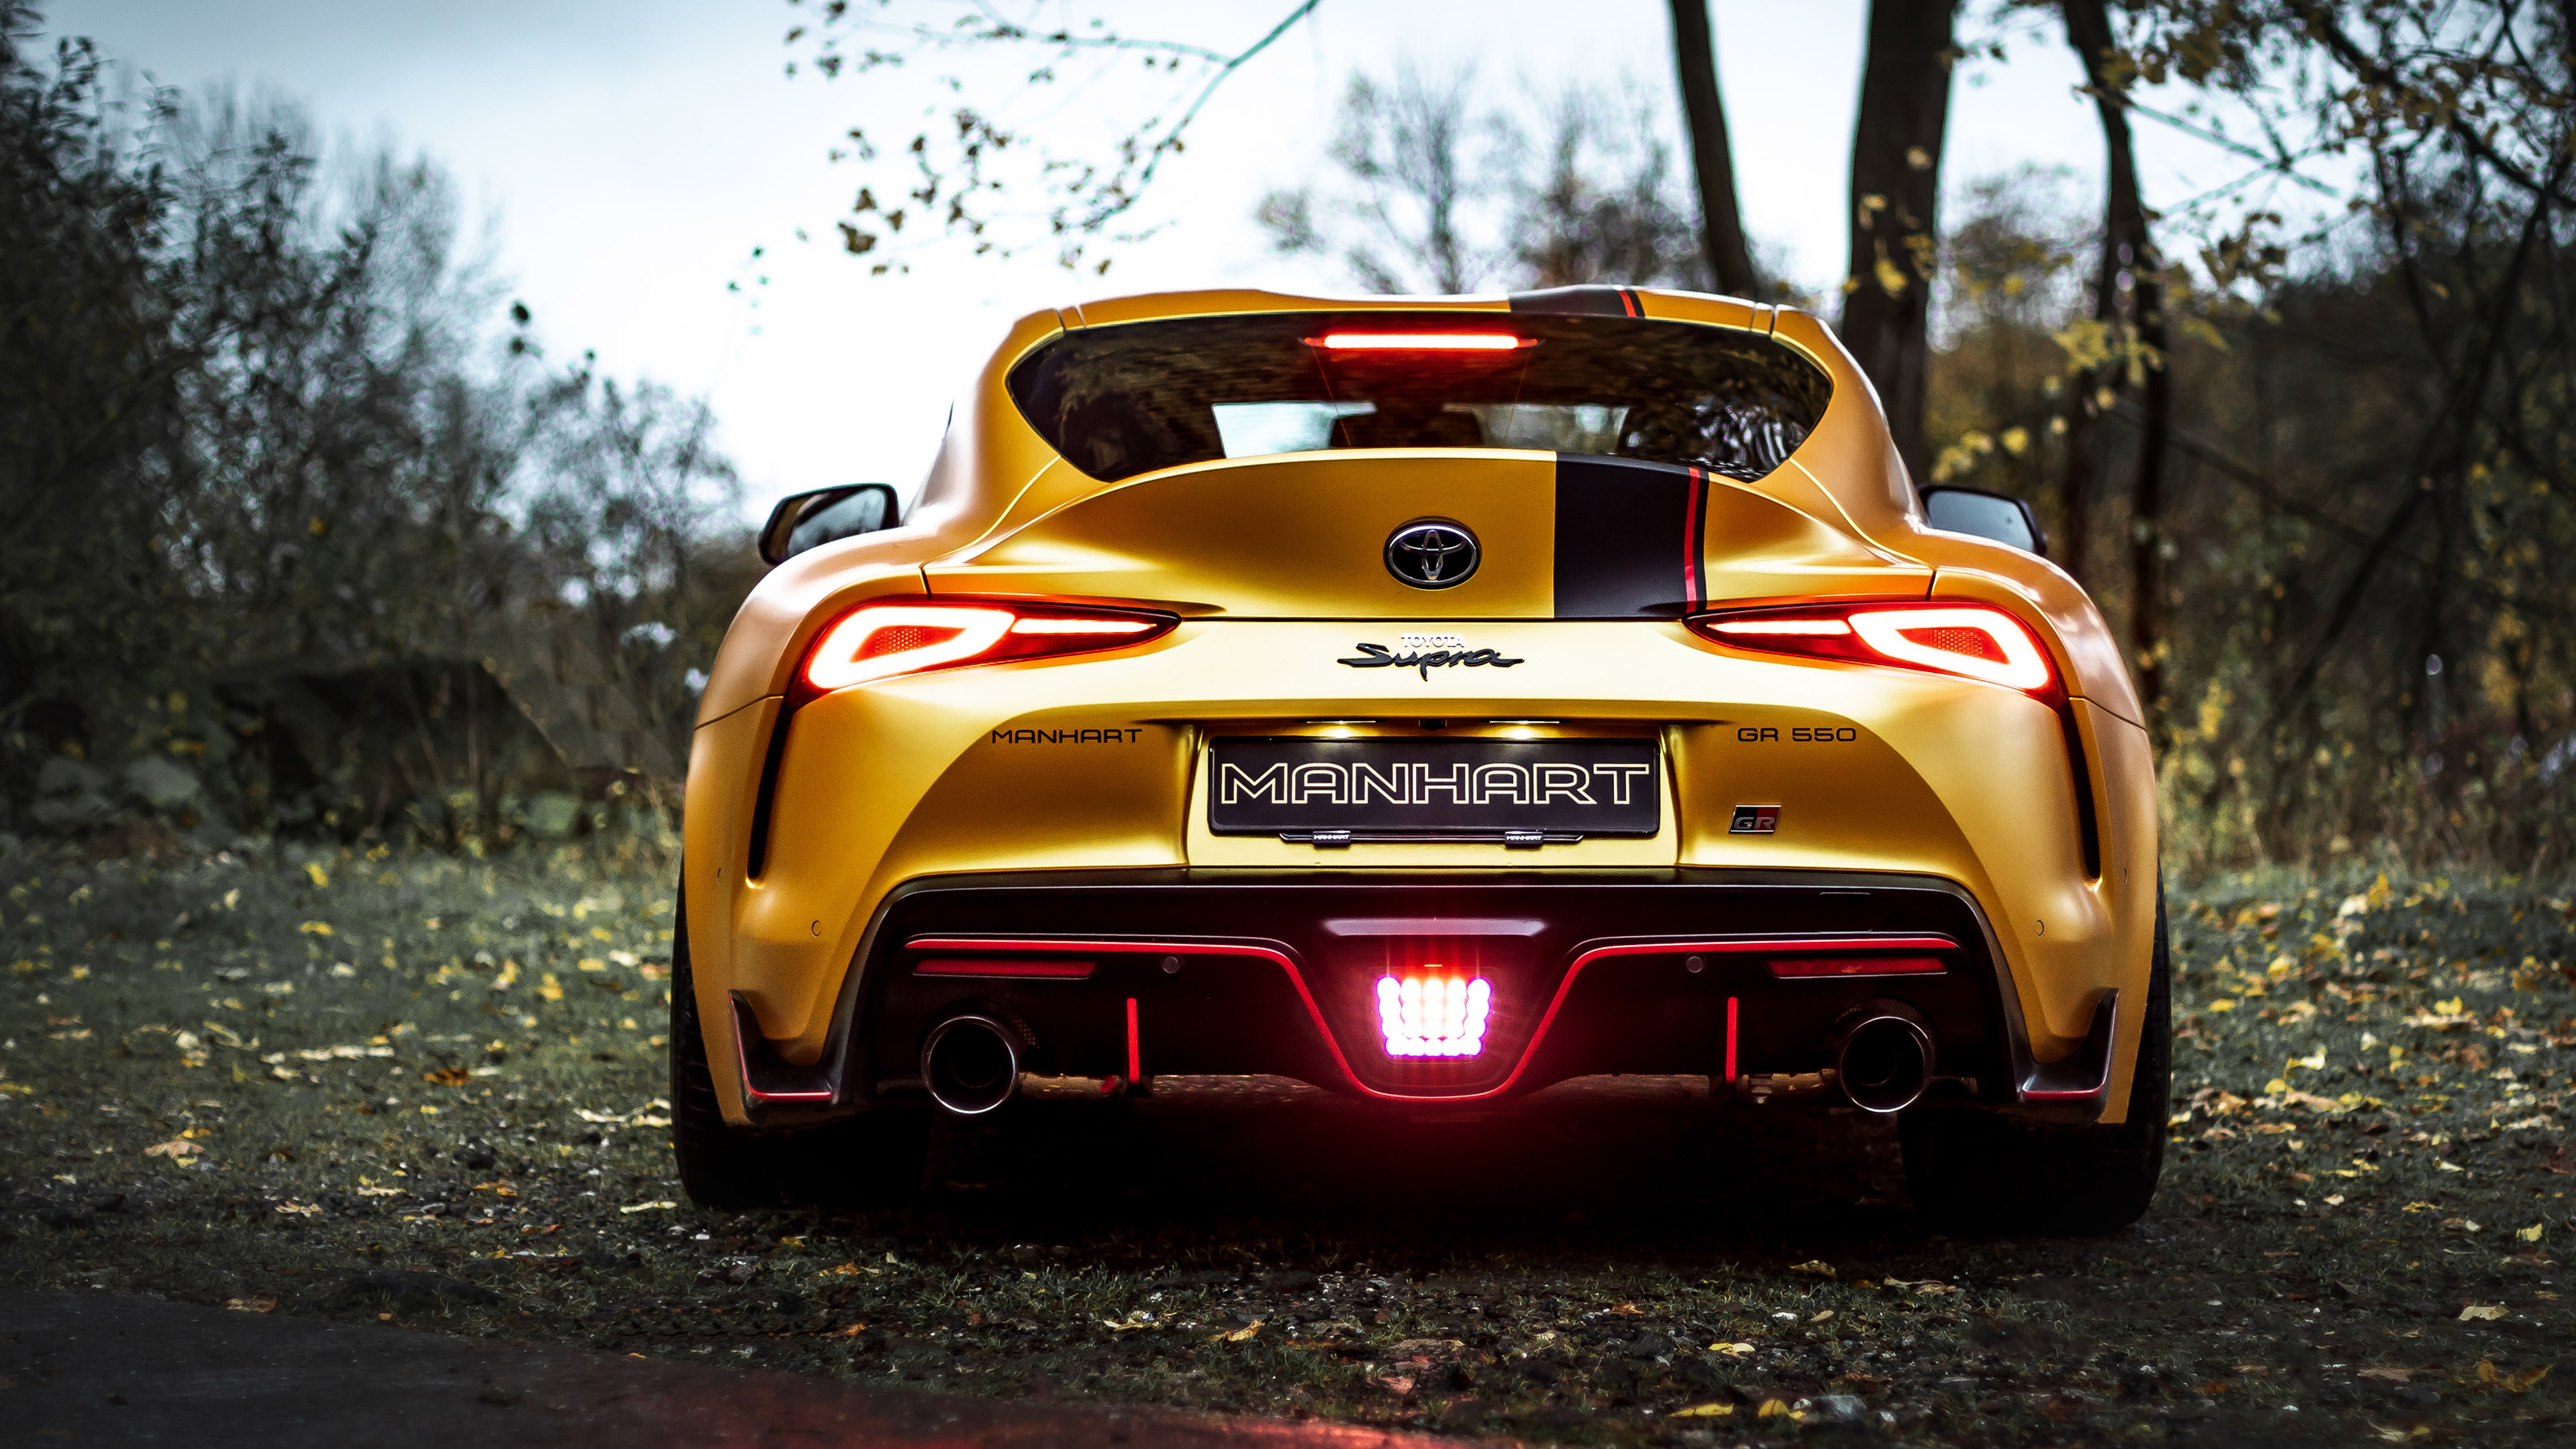 Toyota Supra tuned to 542bhp by Manhart Performance - pictures